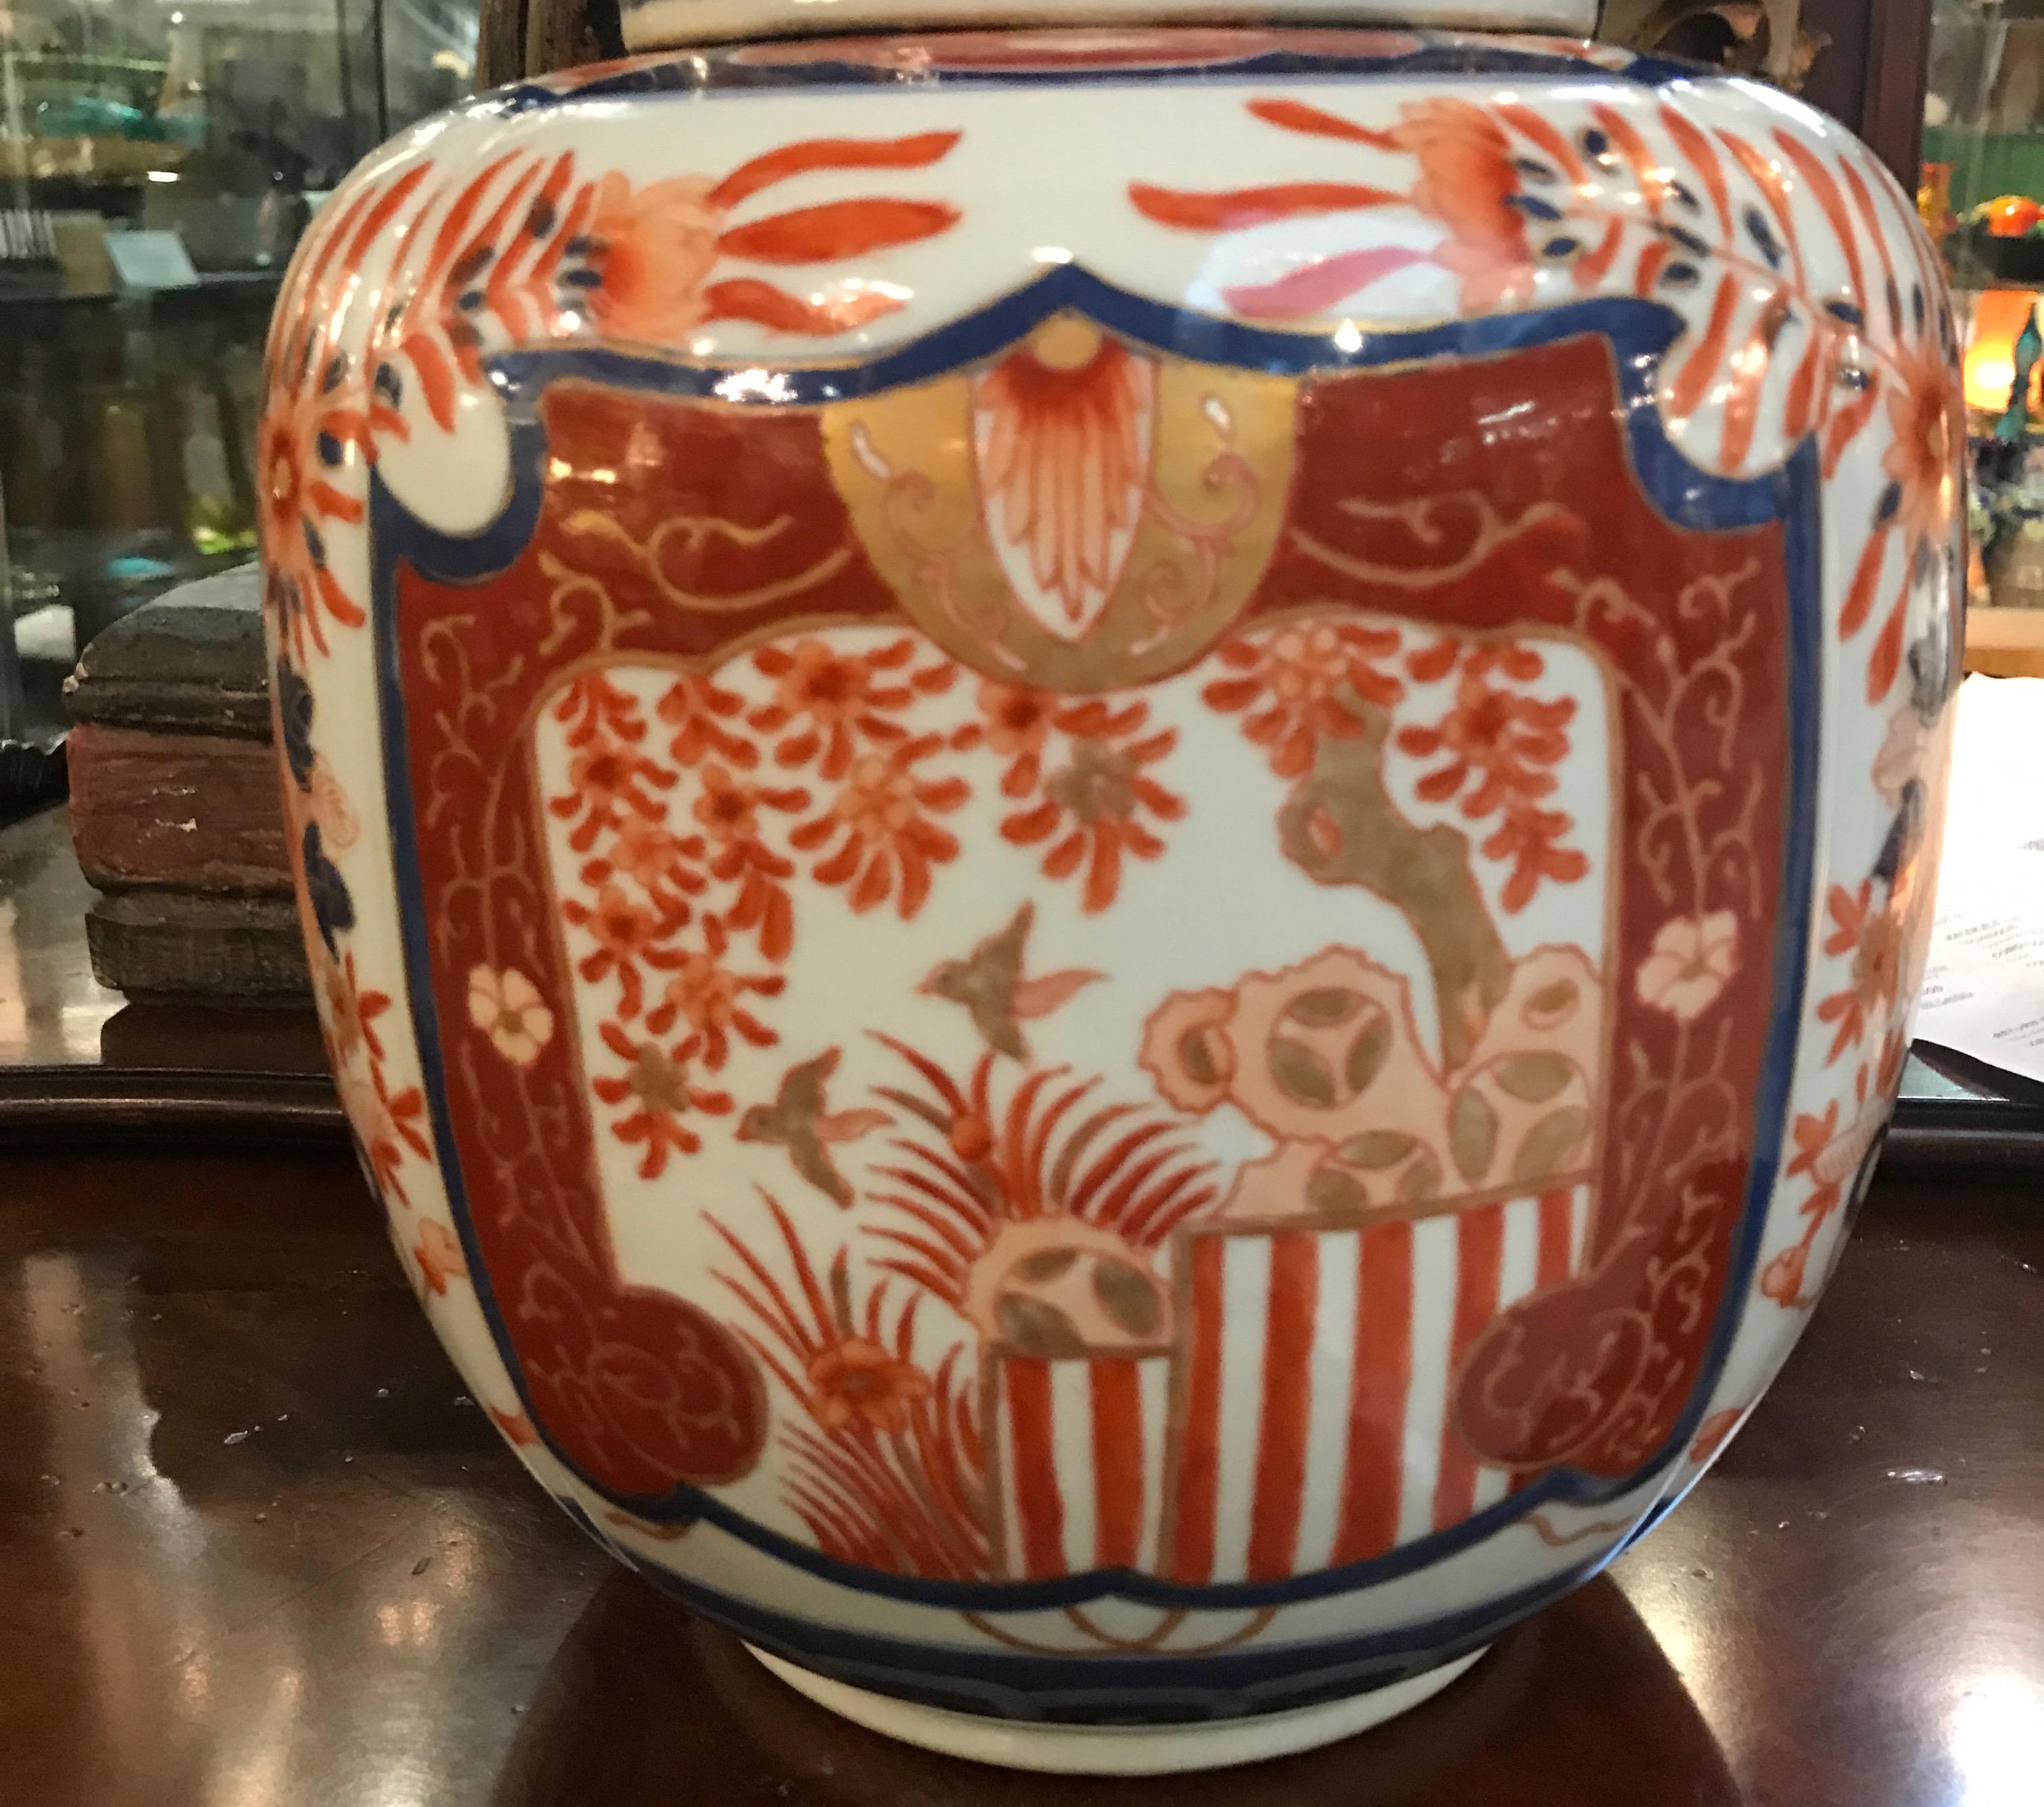 A 19th century Japanese porcelain Imari Jar Meiji period. The Classic iron red and cobalt blue Imari pattern on Japanese white porcelain. The bulbous body with original lid in original and excellent condition.